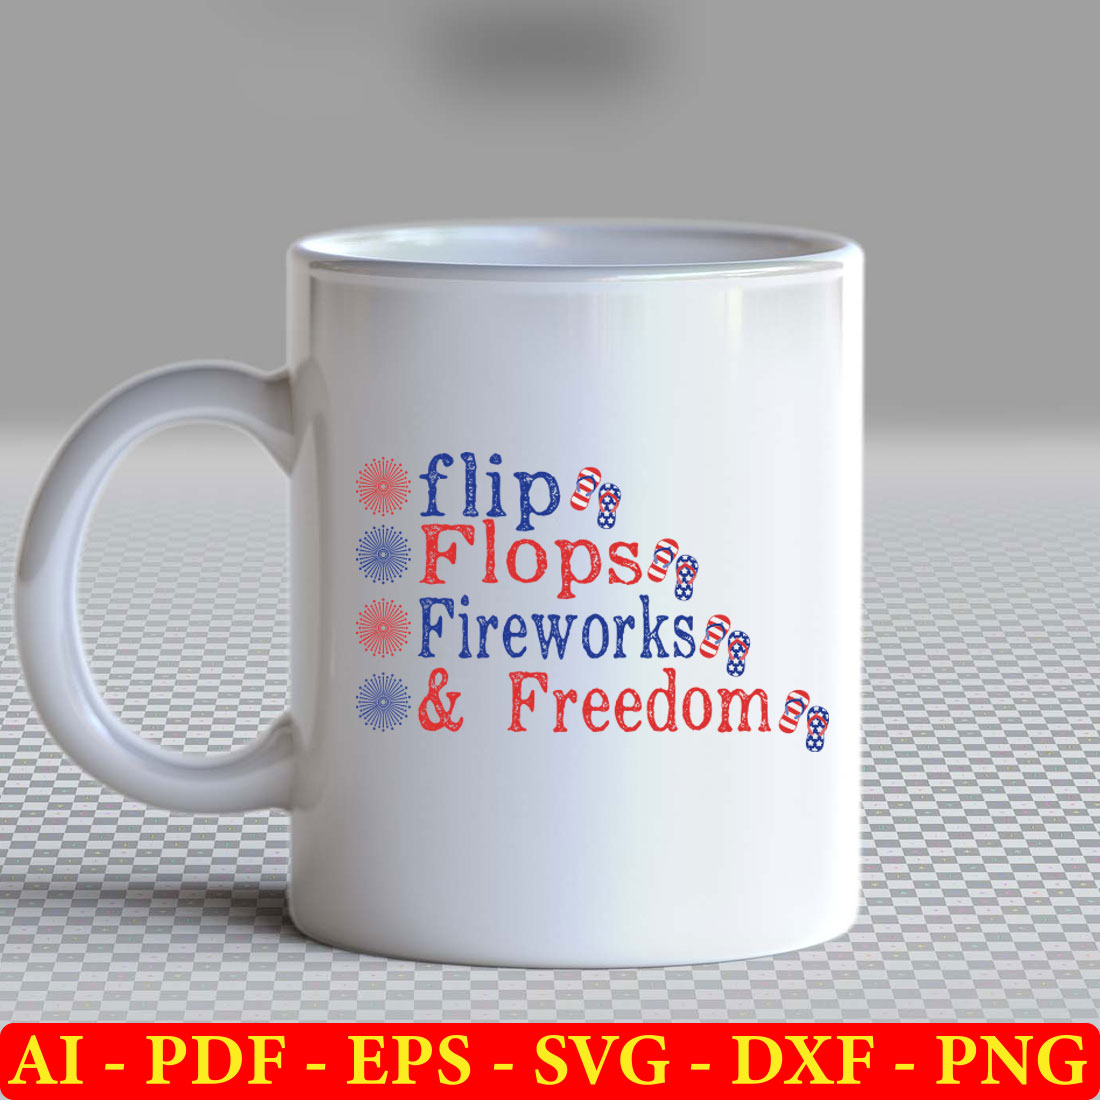 White coffee mug with the words flip flops fireworks and freedom on it.